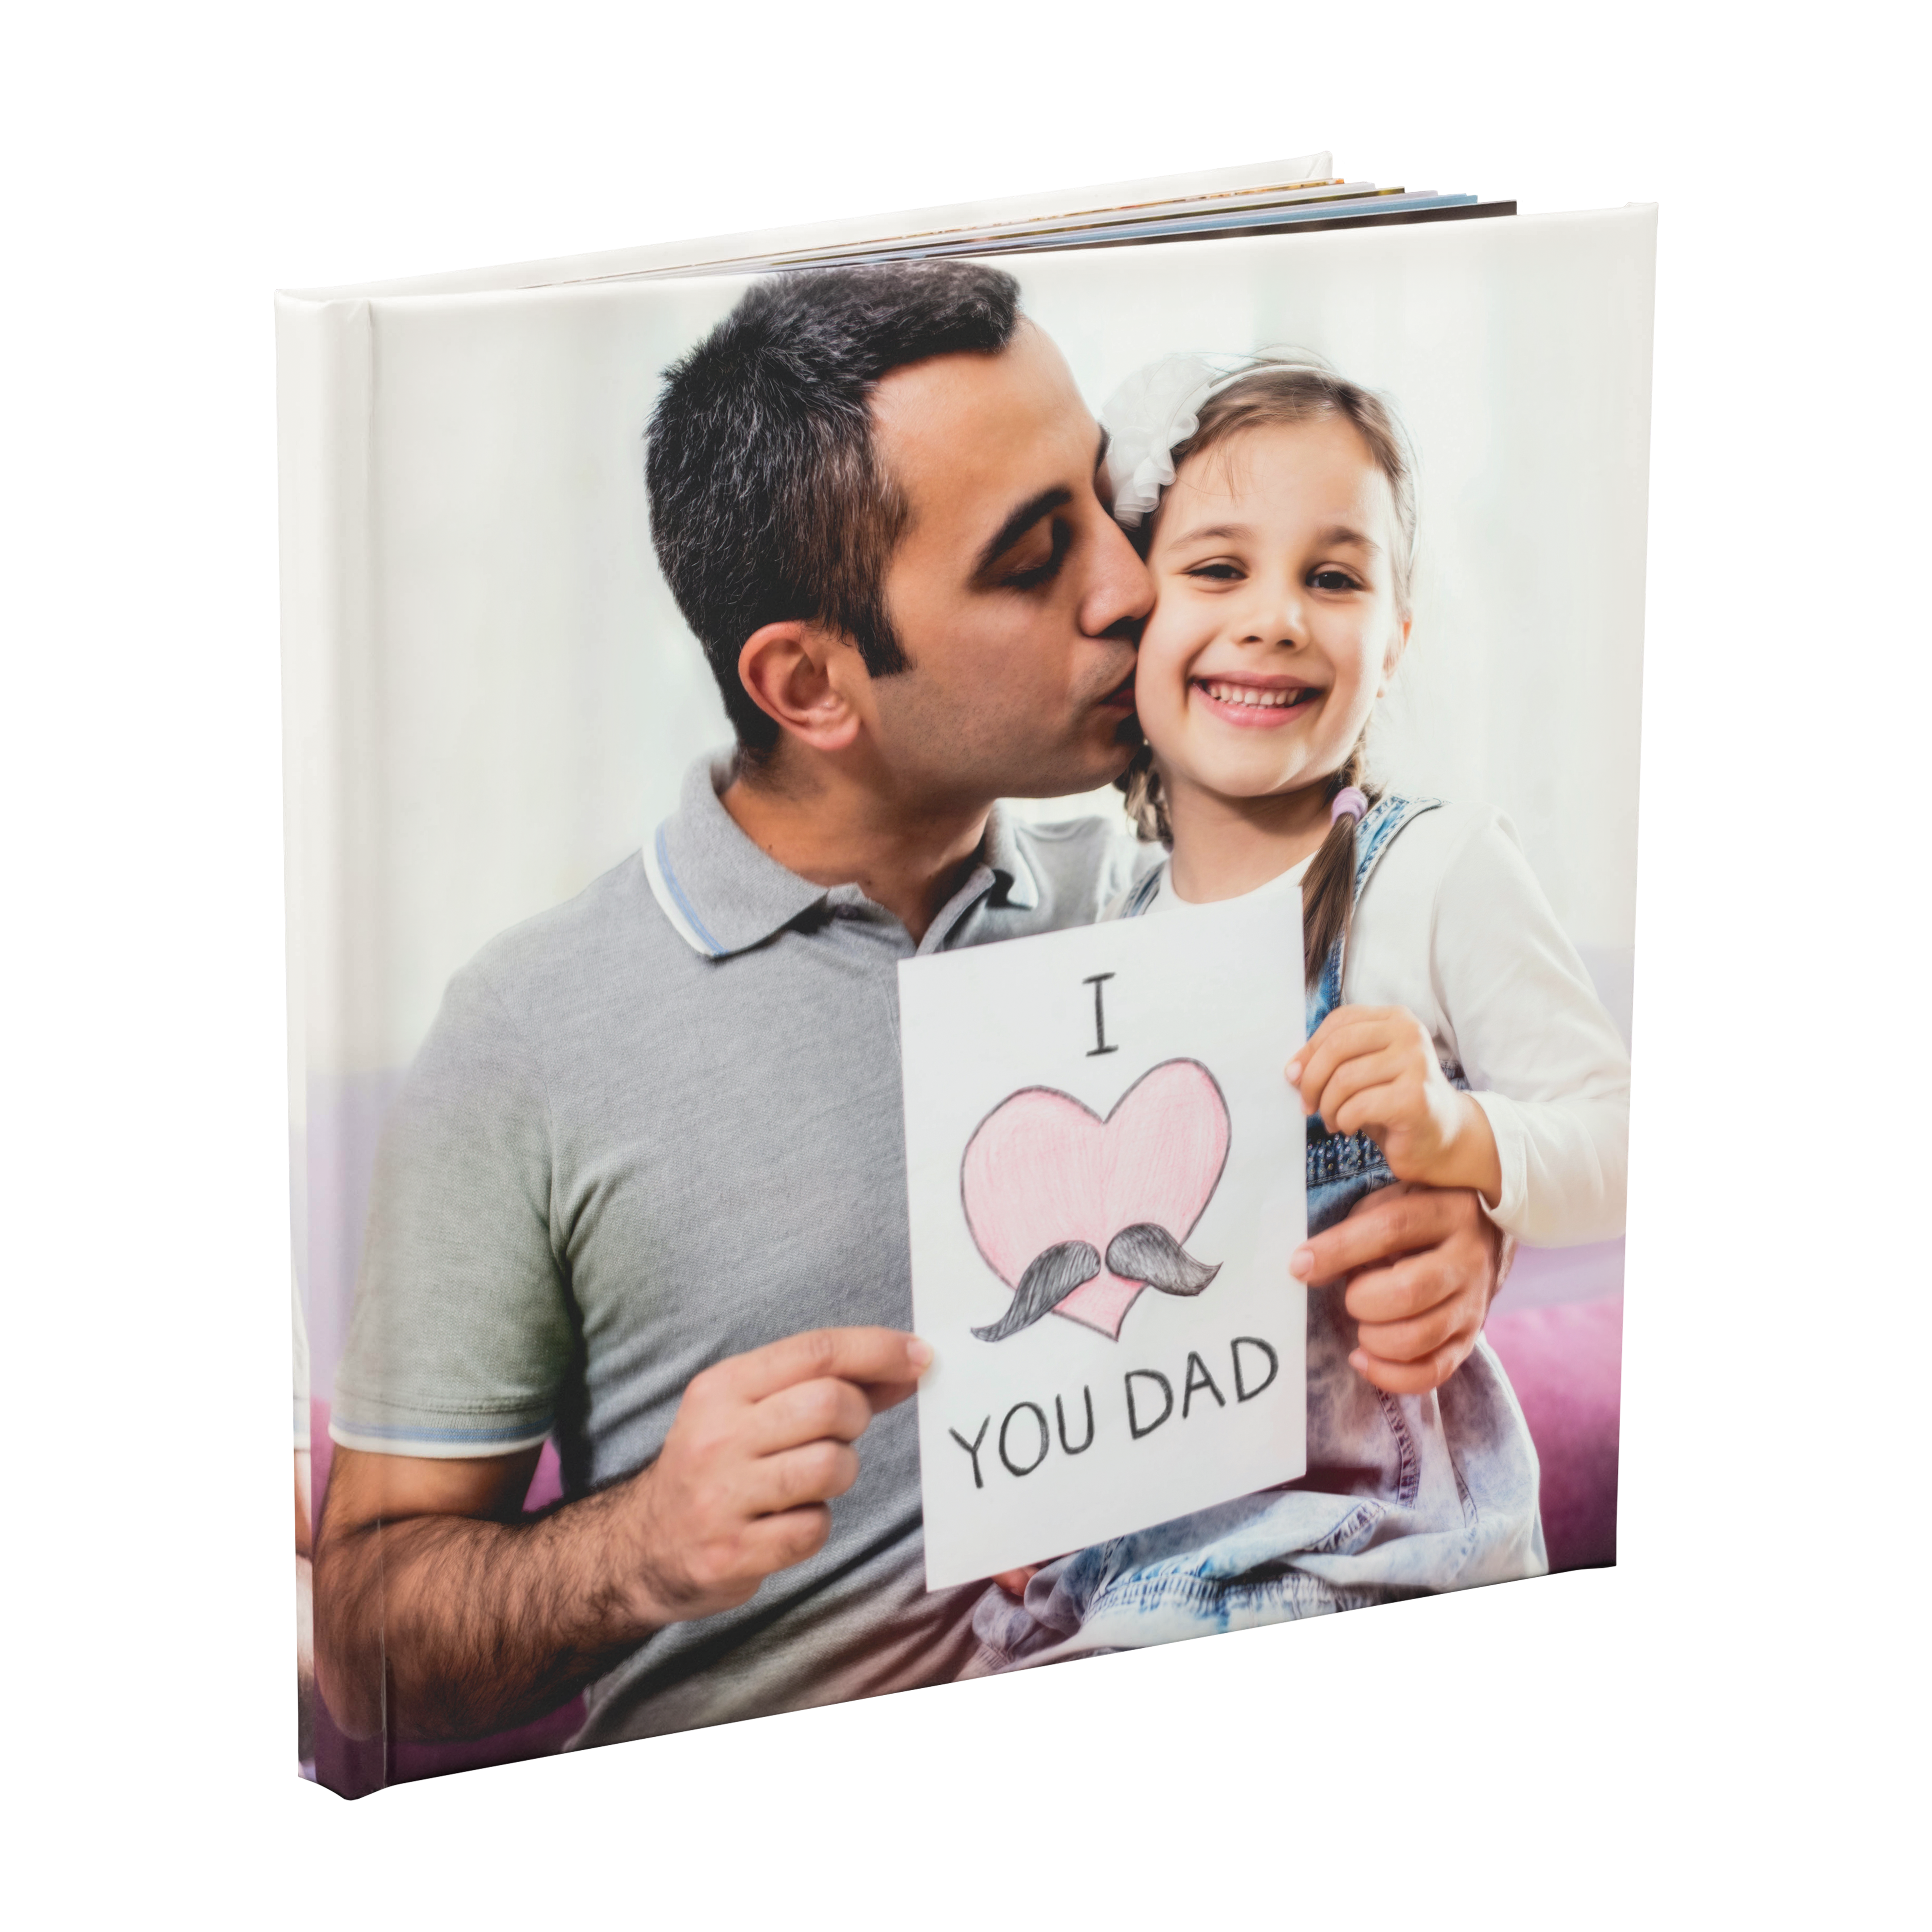 8x8 Hardcover Photo Book with Custom Cover